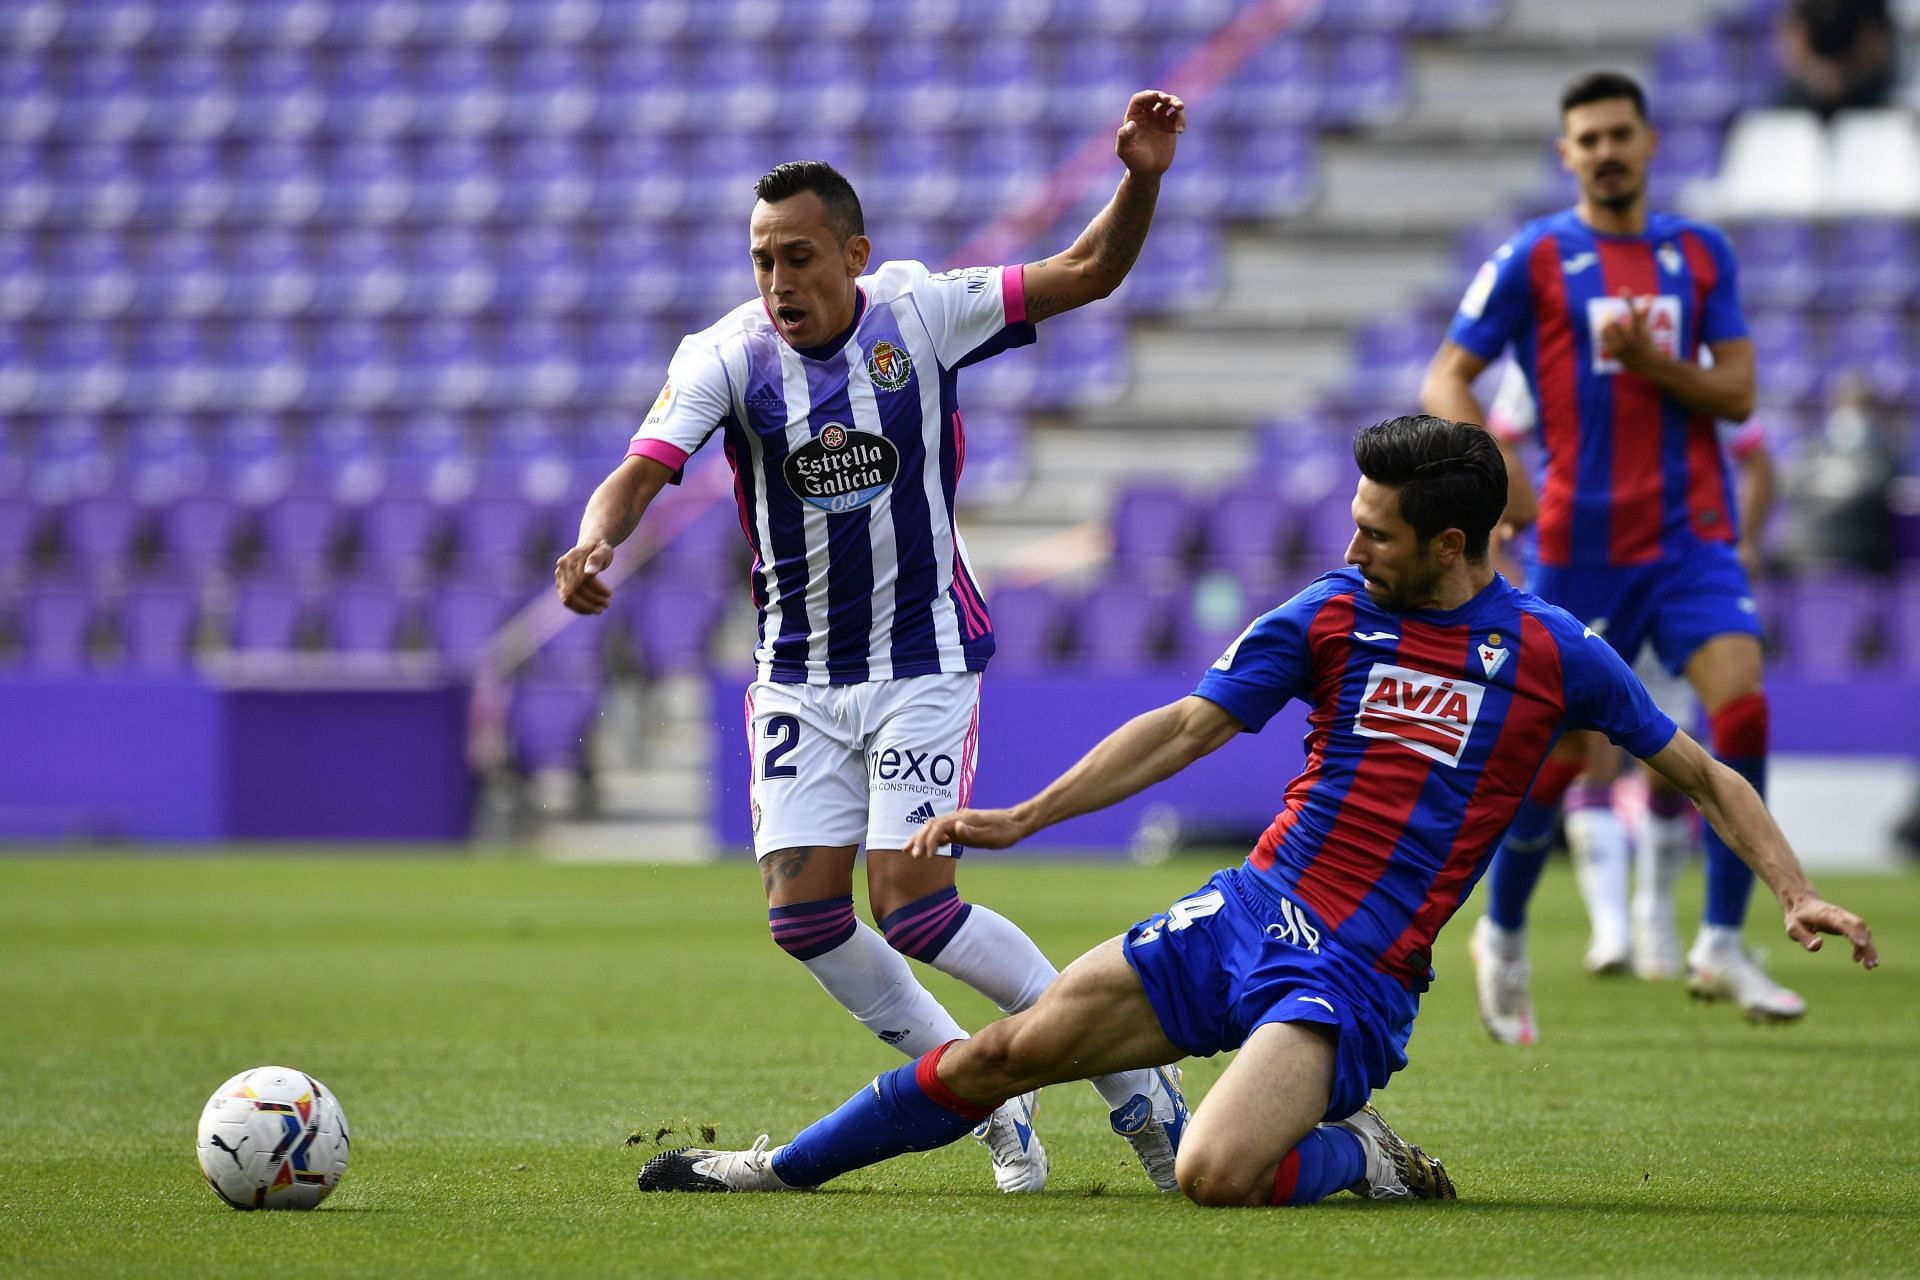 Valladolid are looking to complete a league double over Eibar